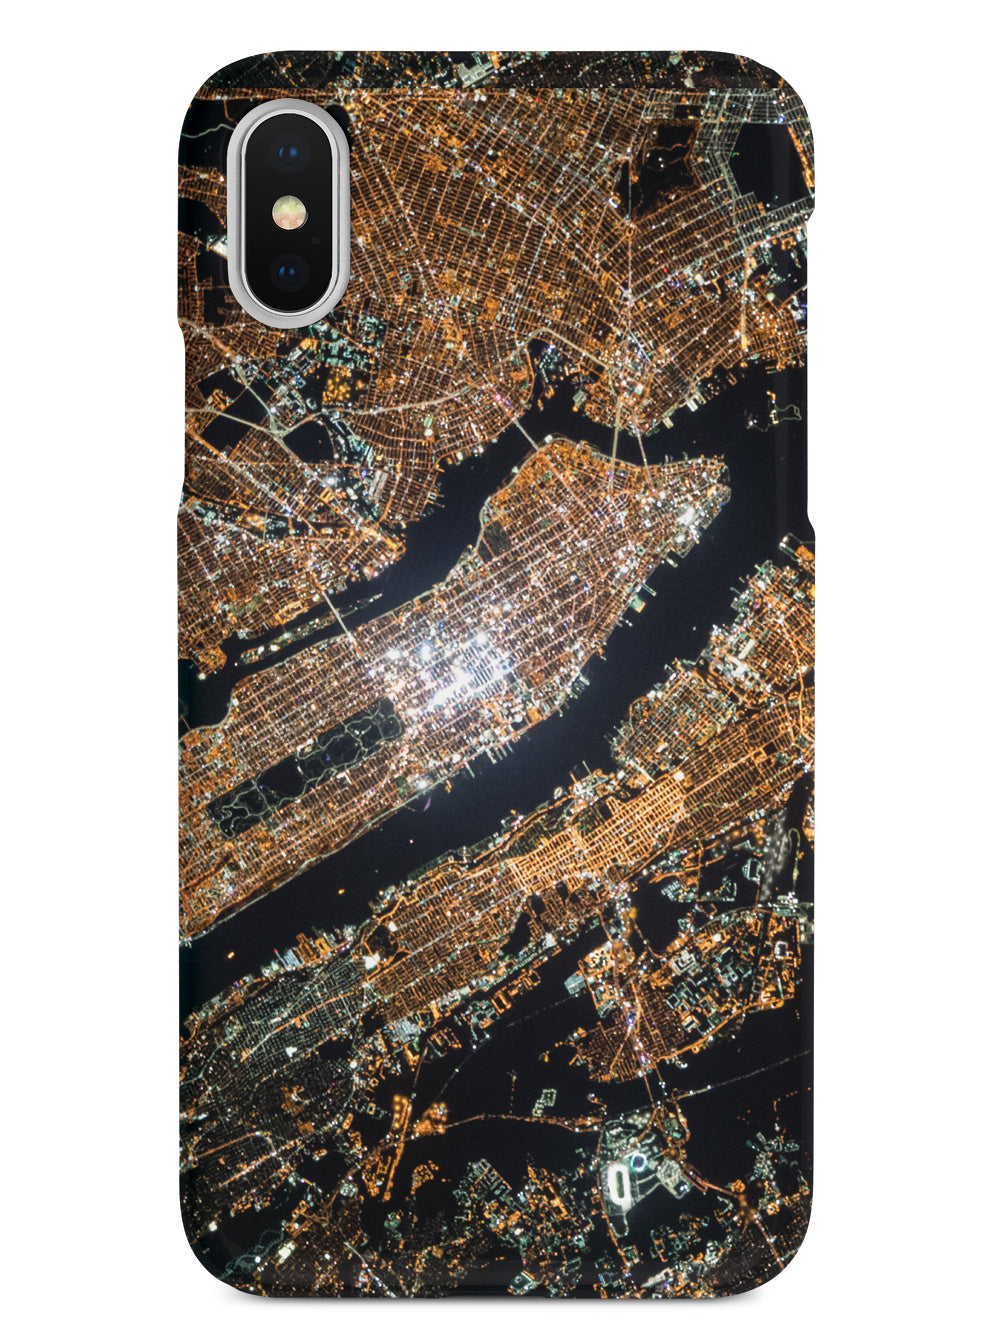 New York at Night from Space Case